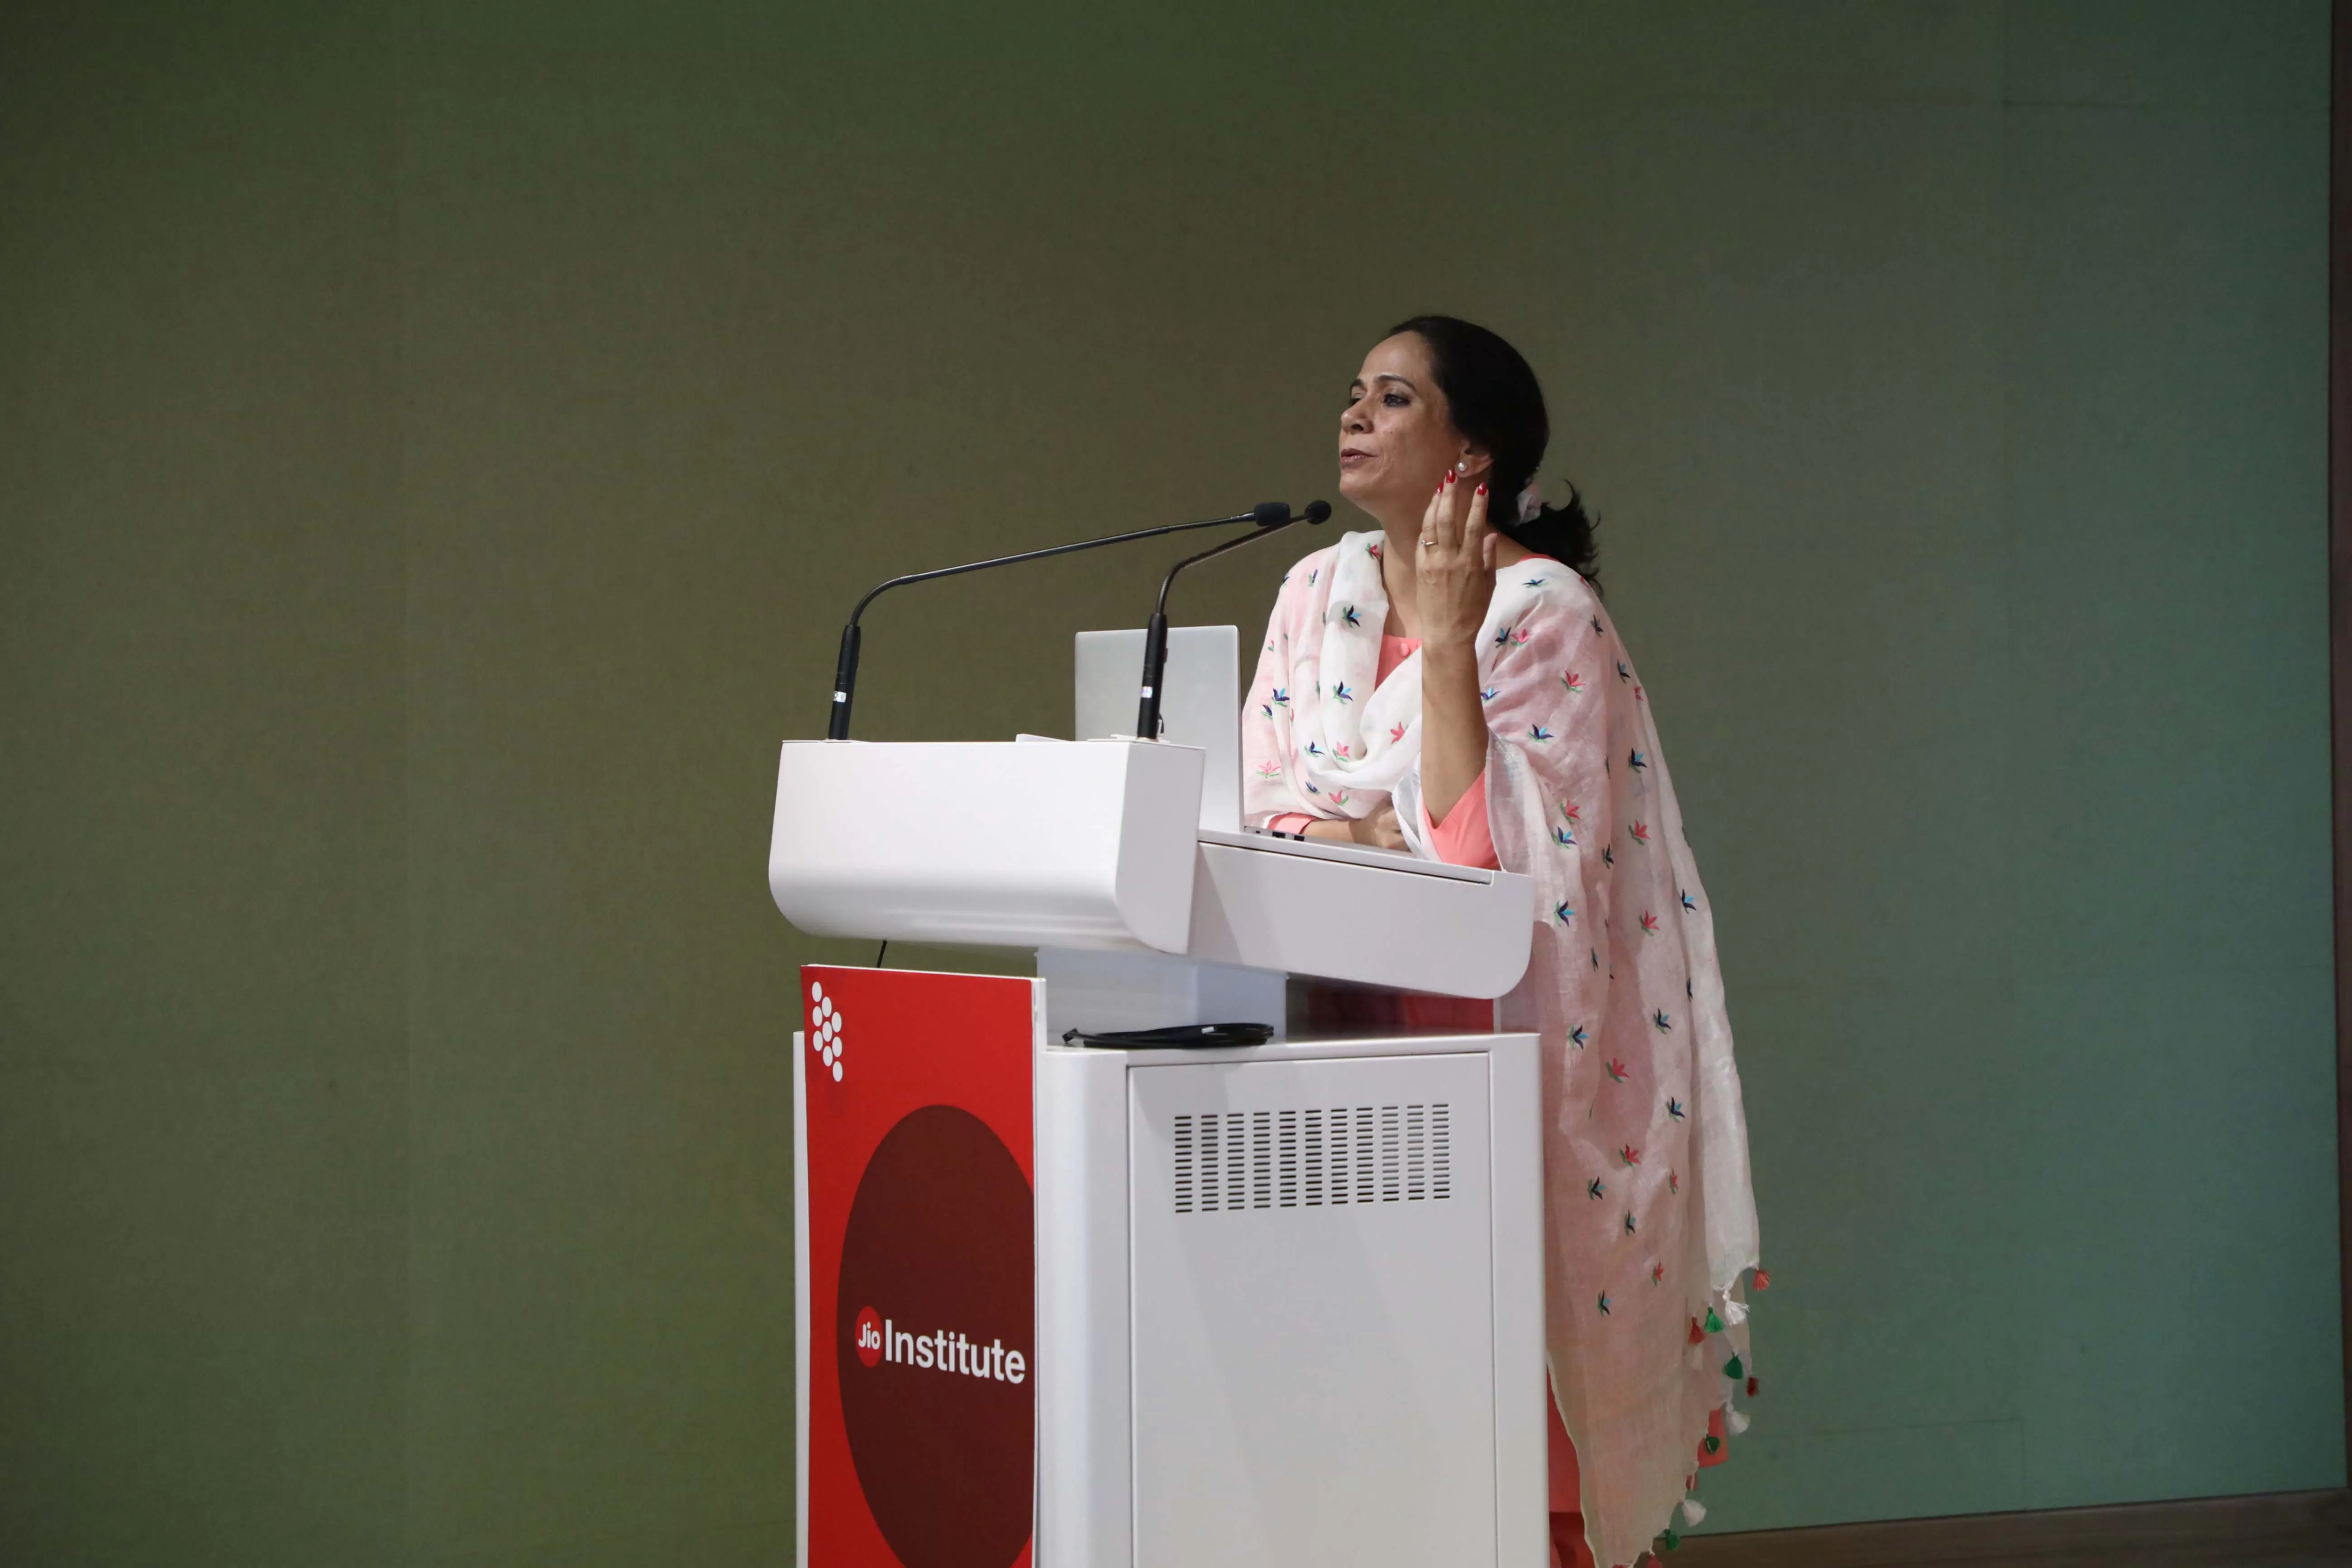 Ms. Monica Dhar addressing students